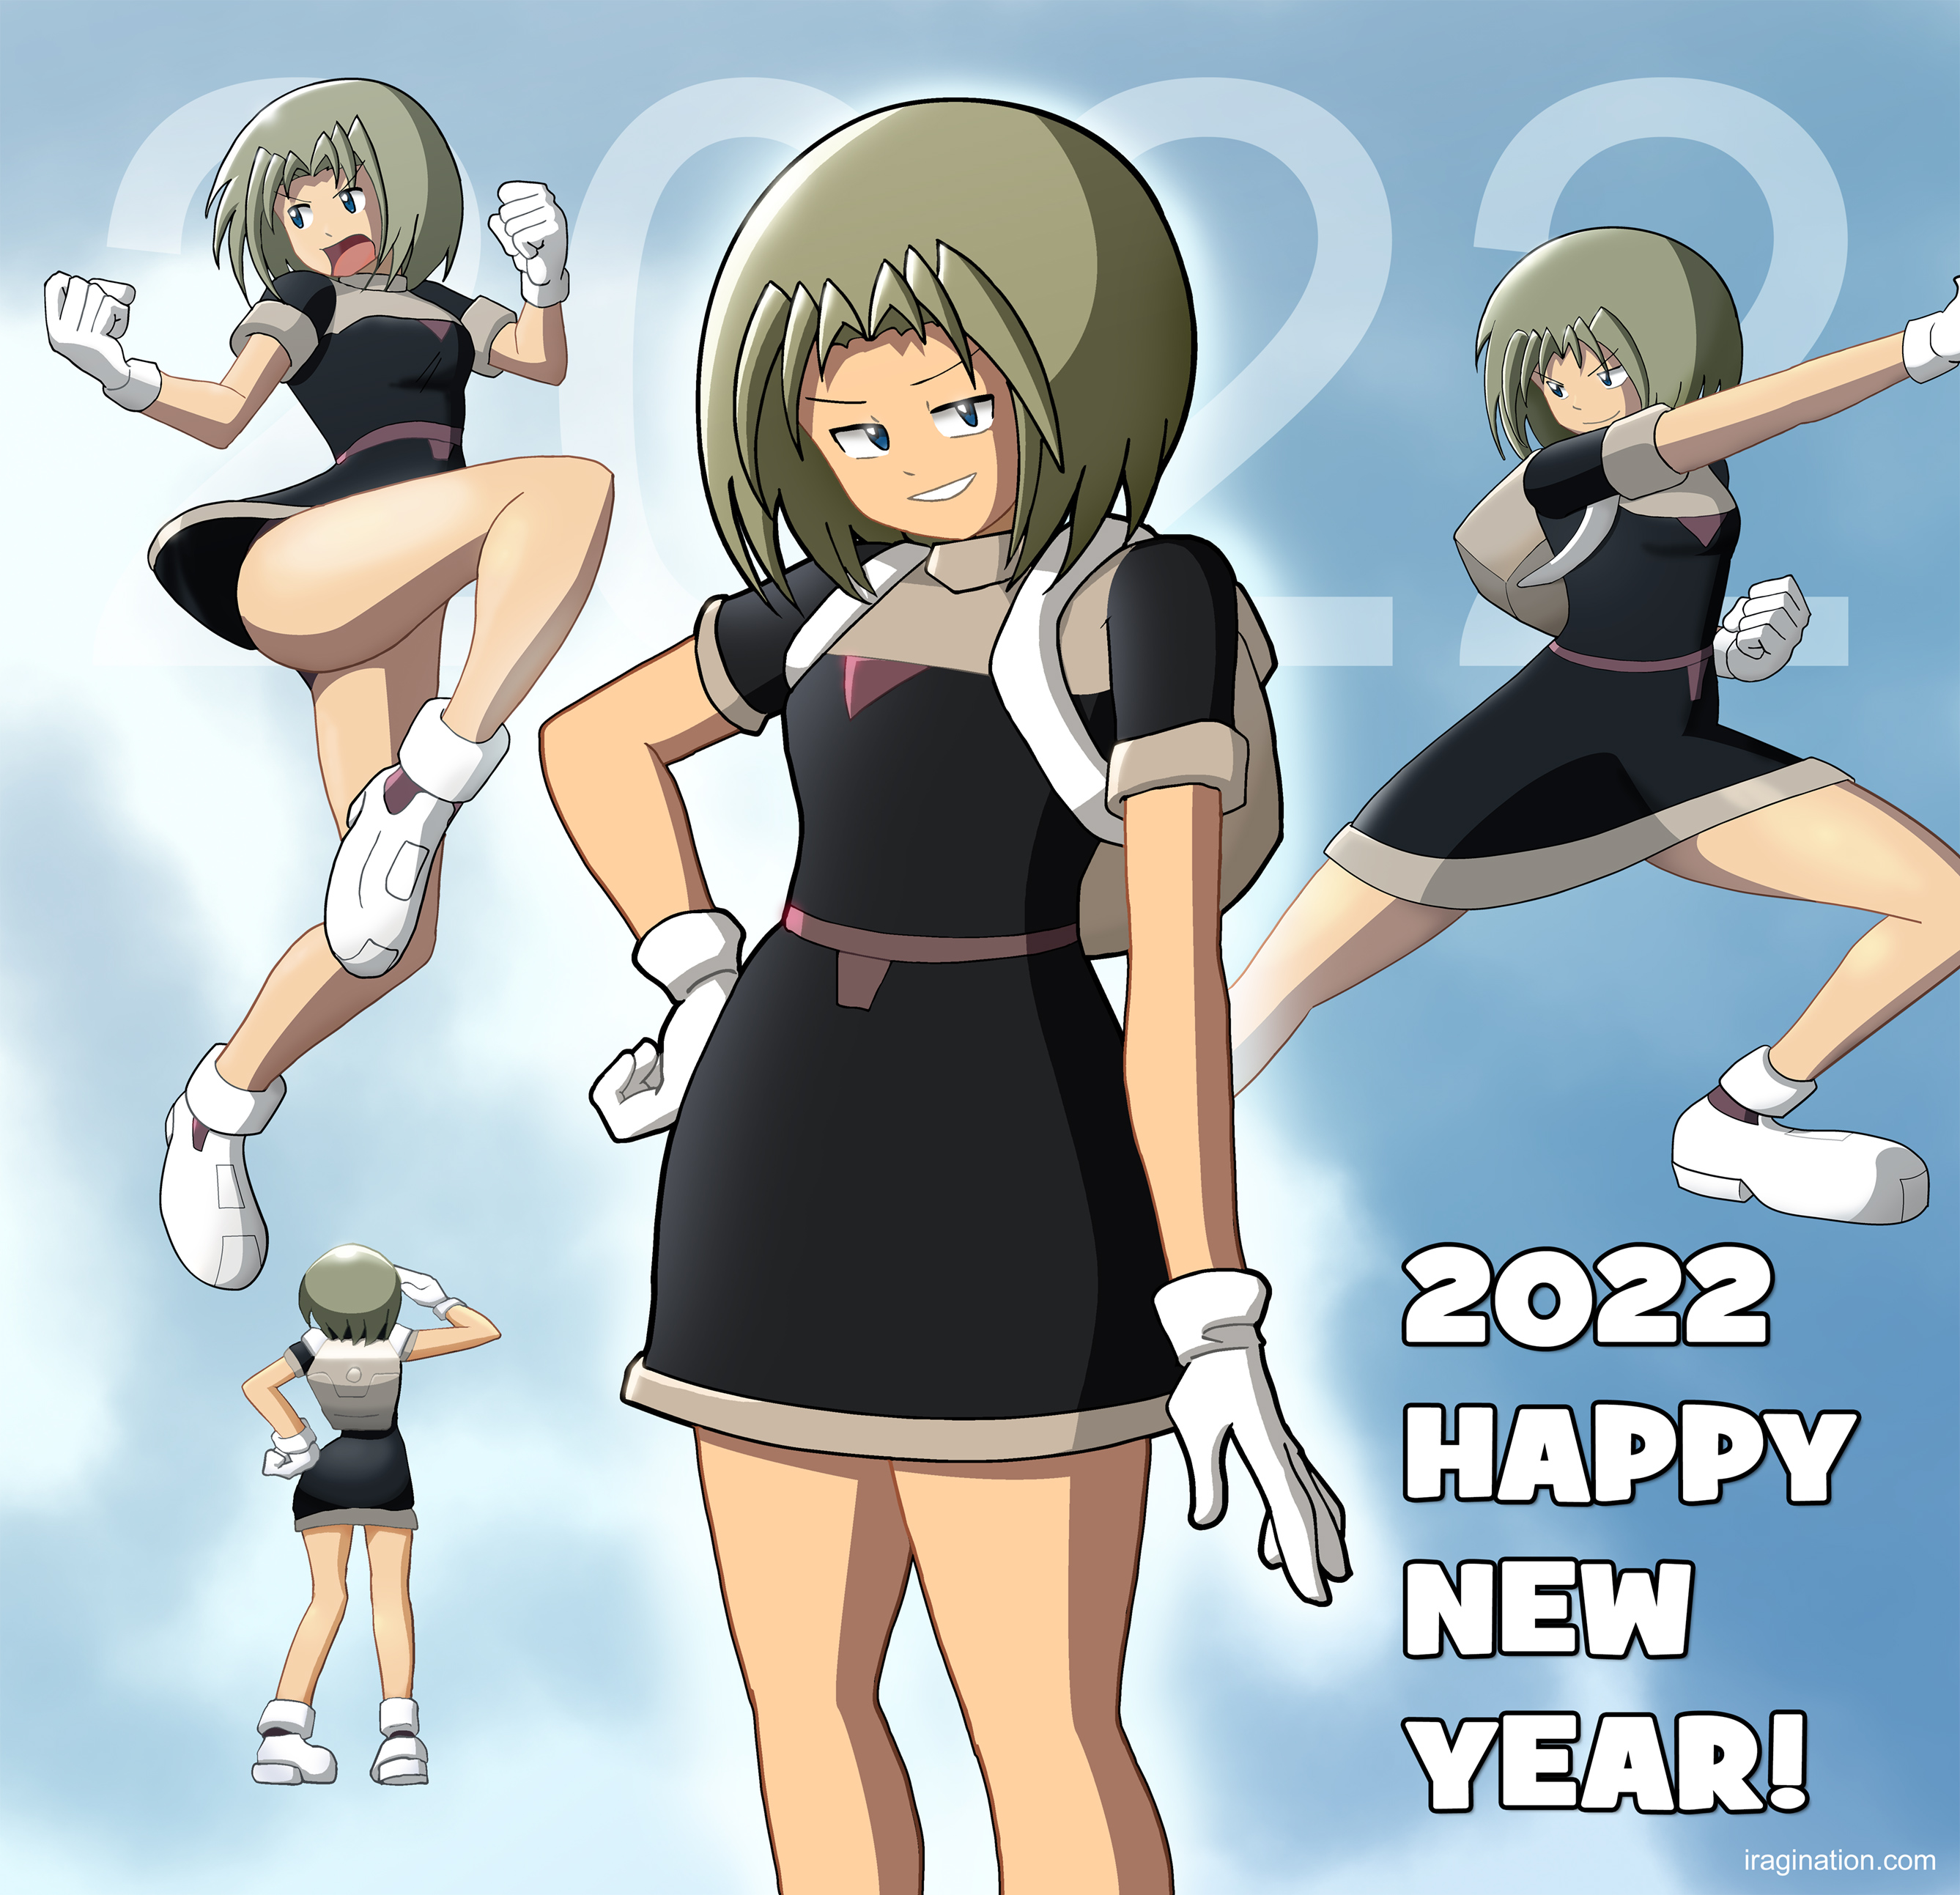 Happy New Year 2022
For this illustration, I did some practice sketches redesigning Deliaâ€™s civil outfit.

Iâ€™ve been doodling several design ideas for years, but this set came kind of cute, and decided to color it.

Happy New Year 2022 and stay safe!
Keywords: delia